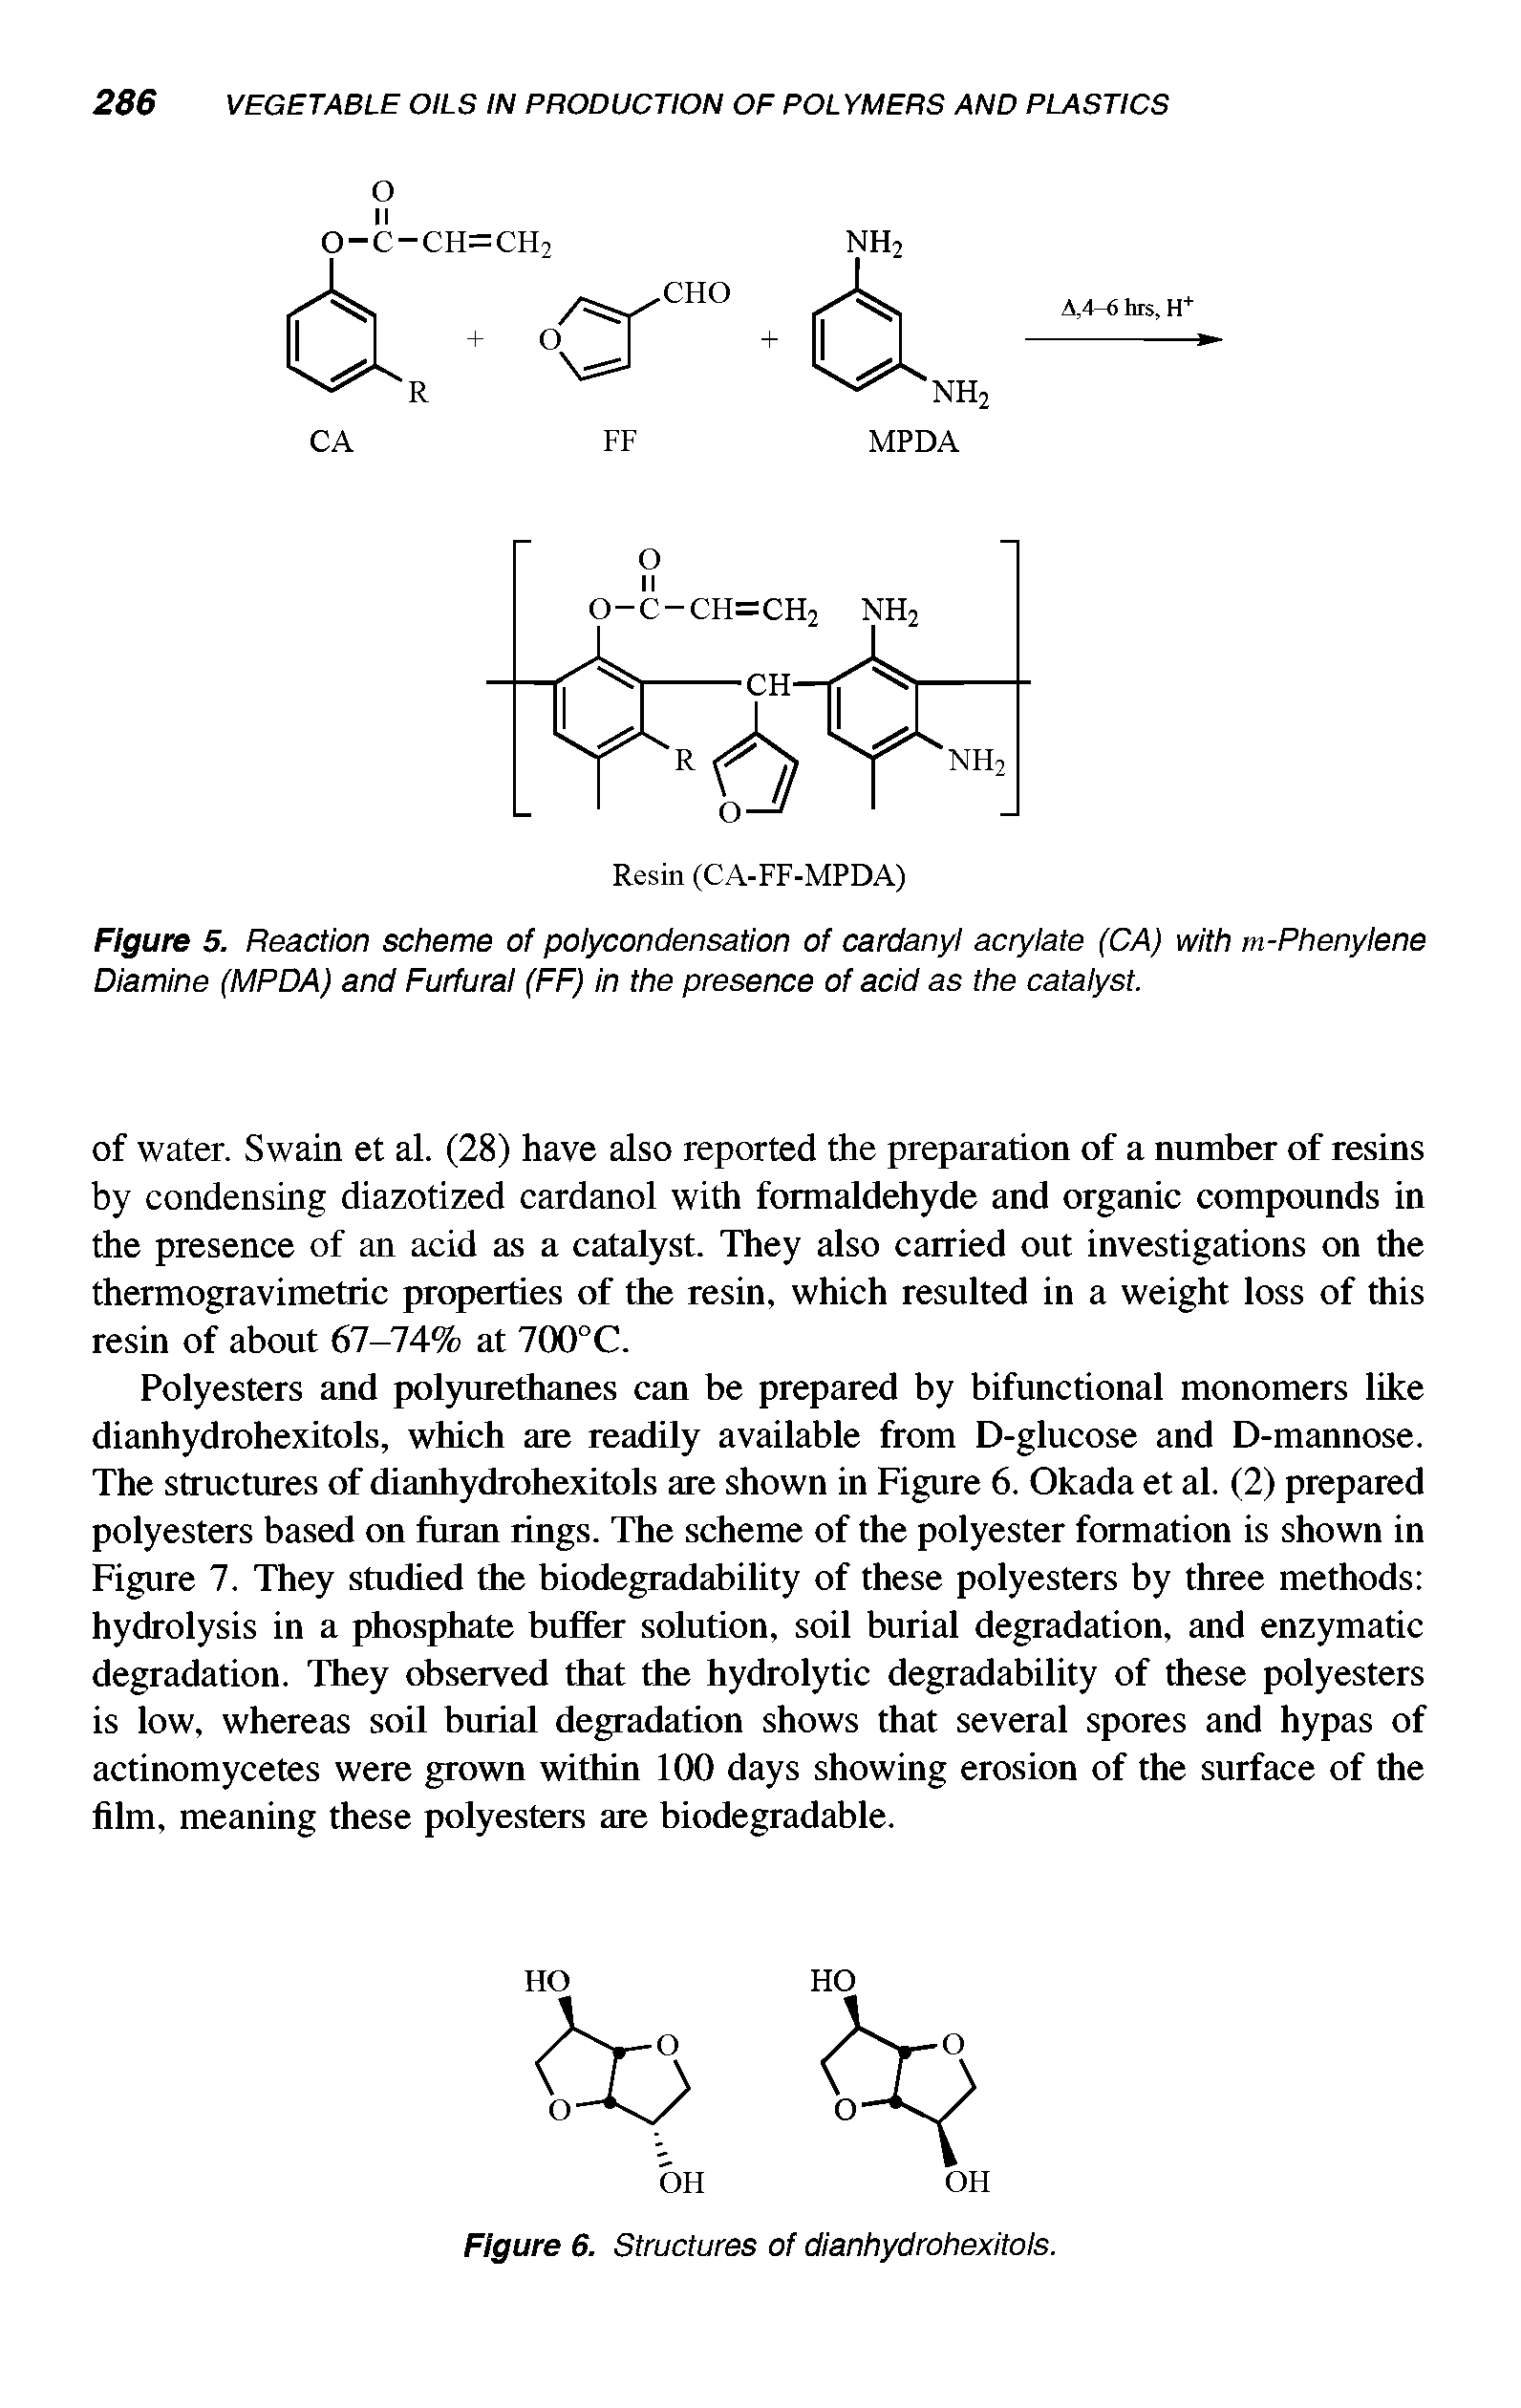 Figure 5. Reaction scheme of polycondensation of cardanyi acrylate (CA) with m-Phenylene Diamine (MPDA) and Furfural (FF) in the presence of acid as the catalyst.